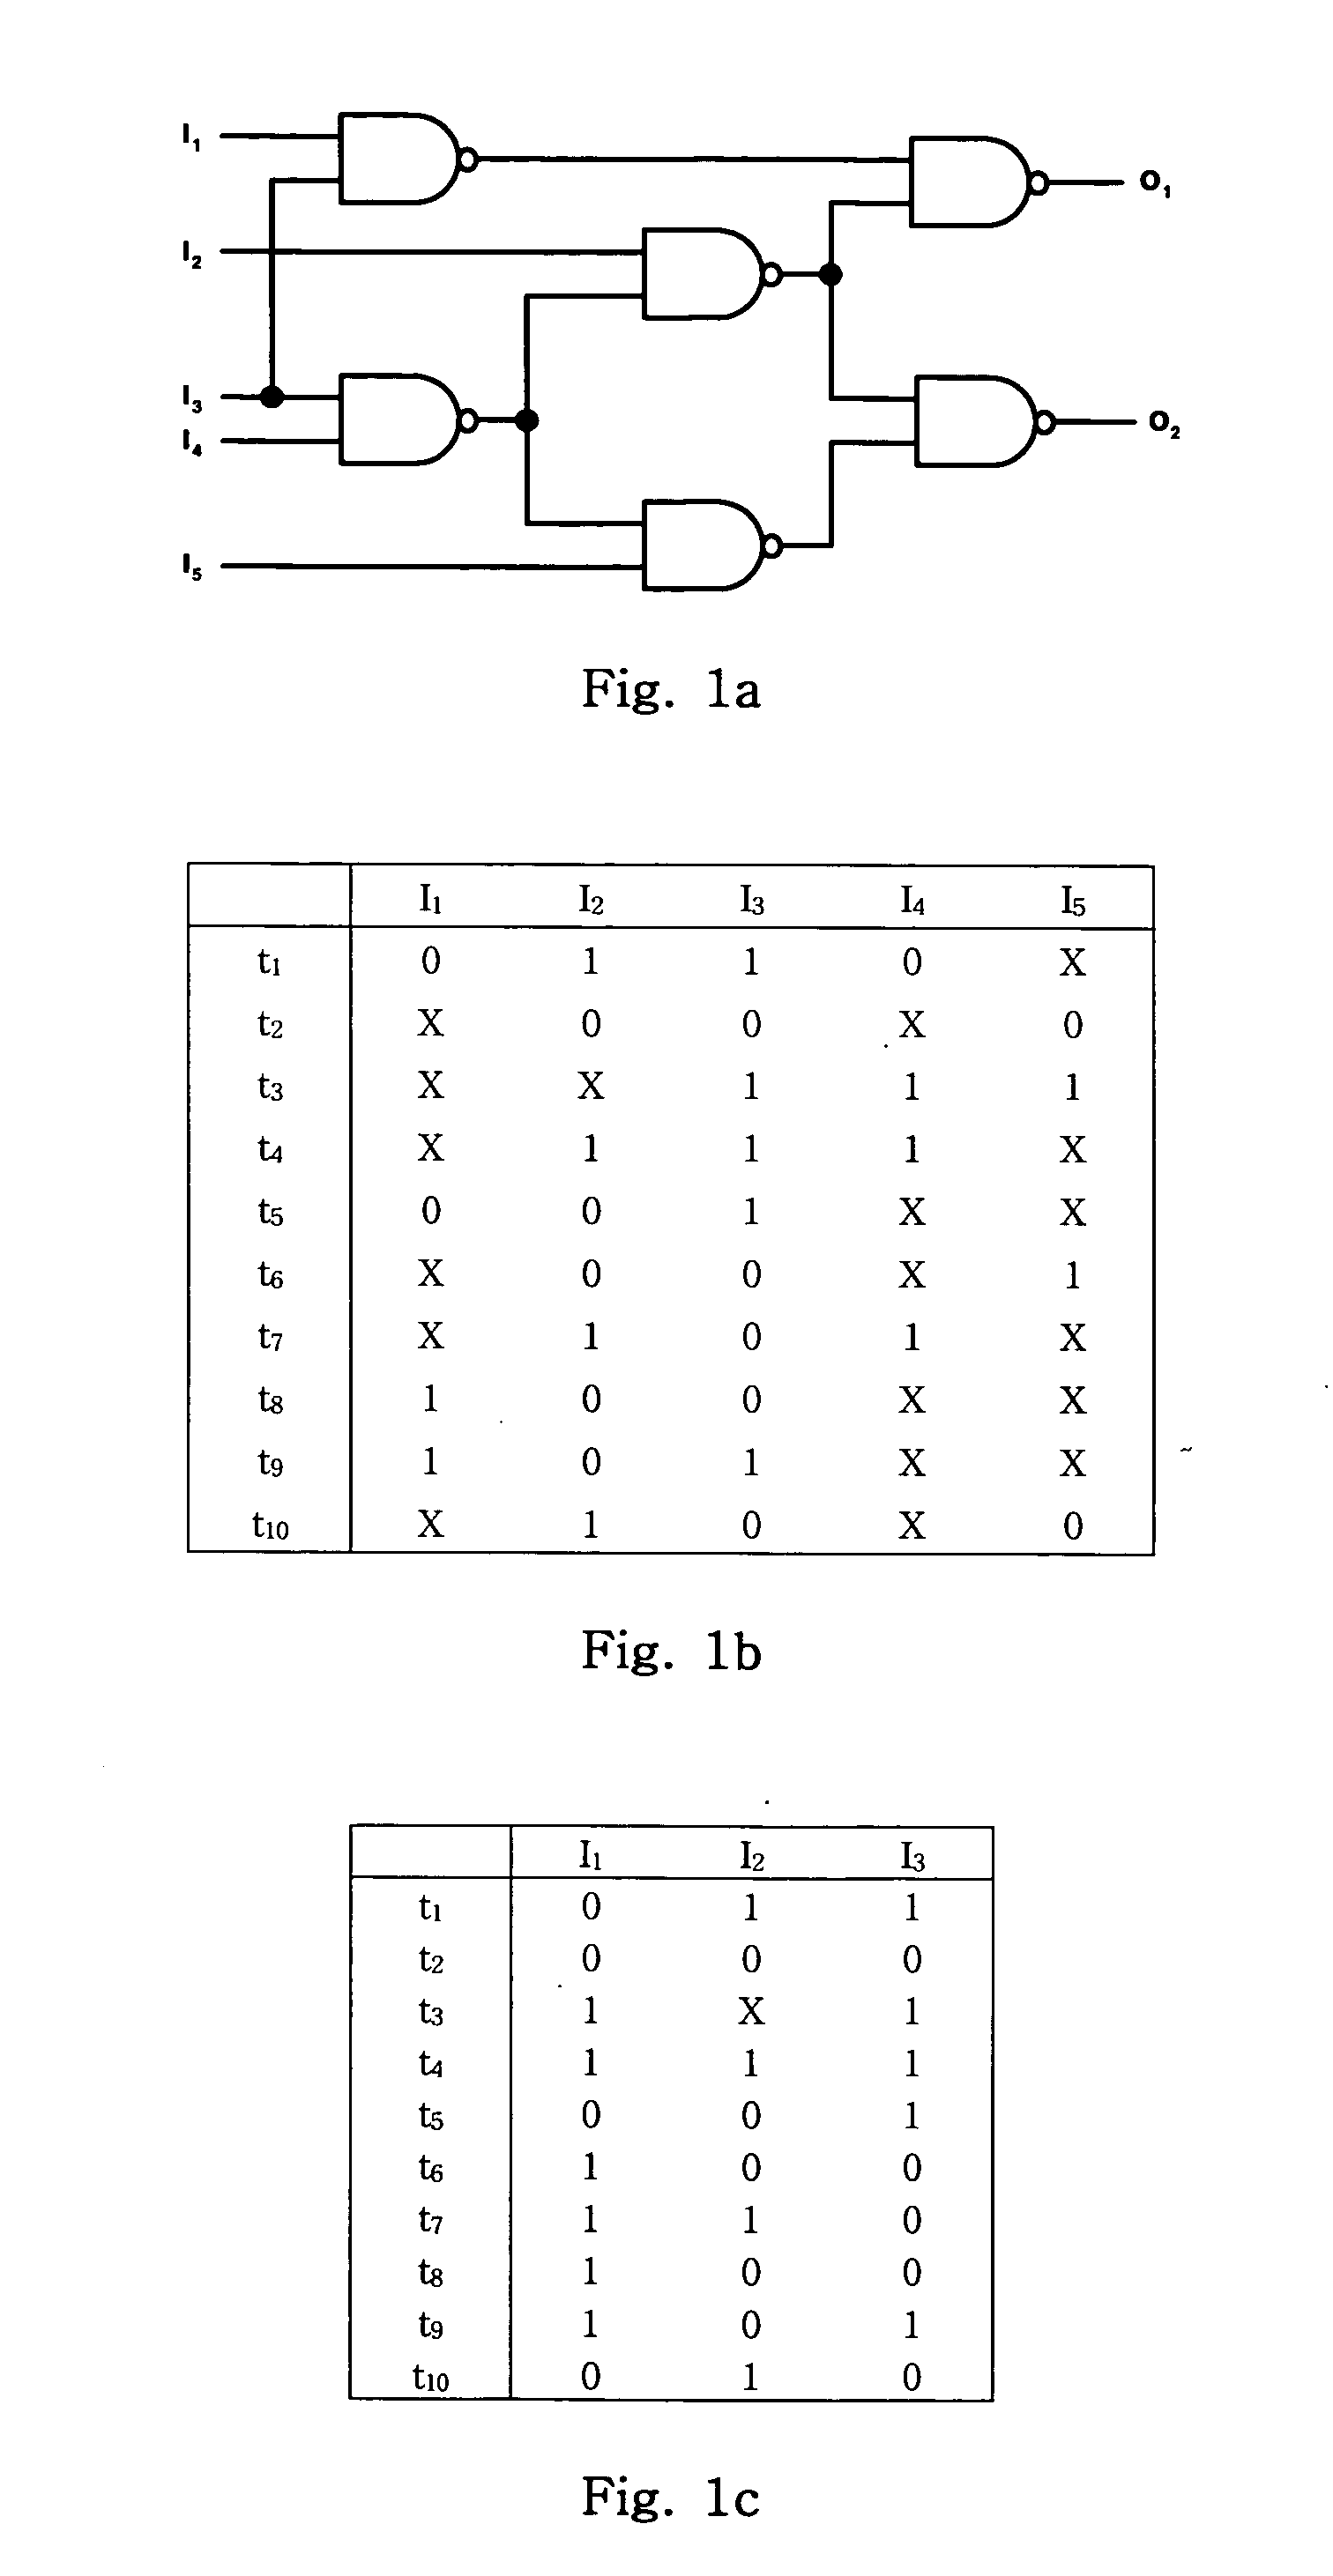 Method of efficiently compressing and decompressing test data using input reduction